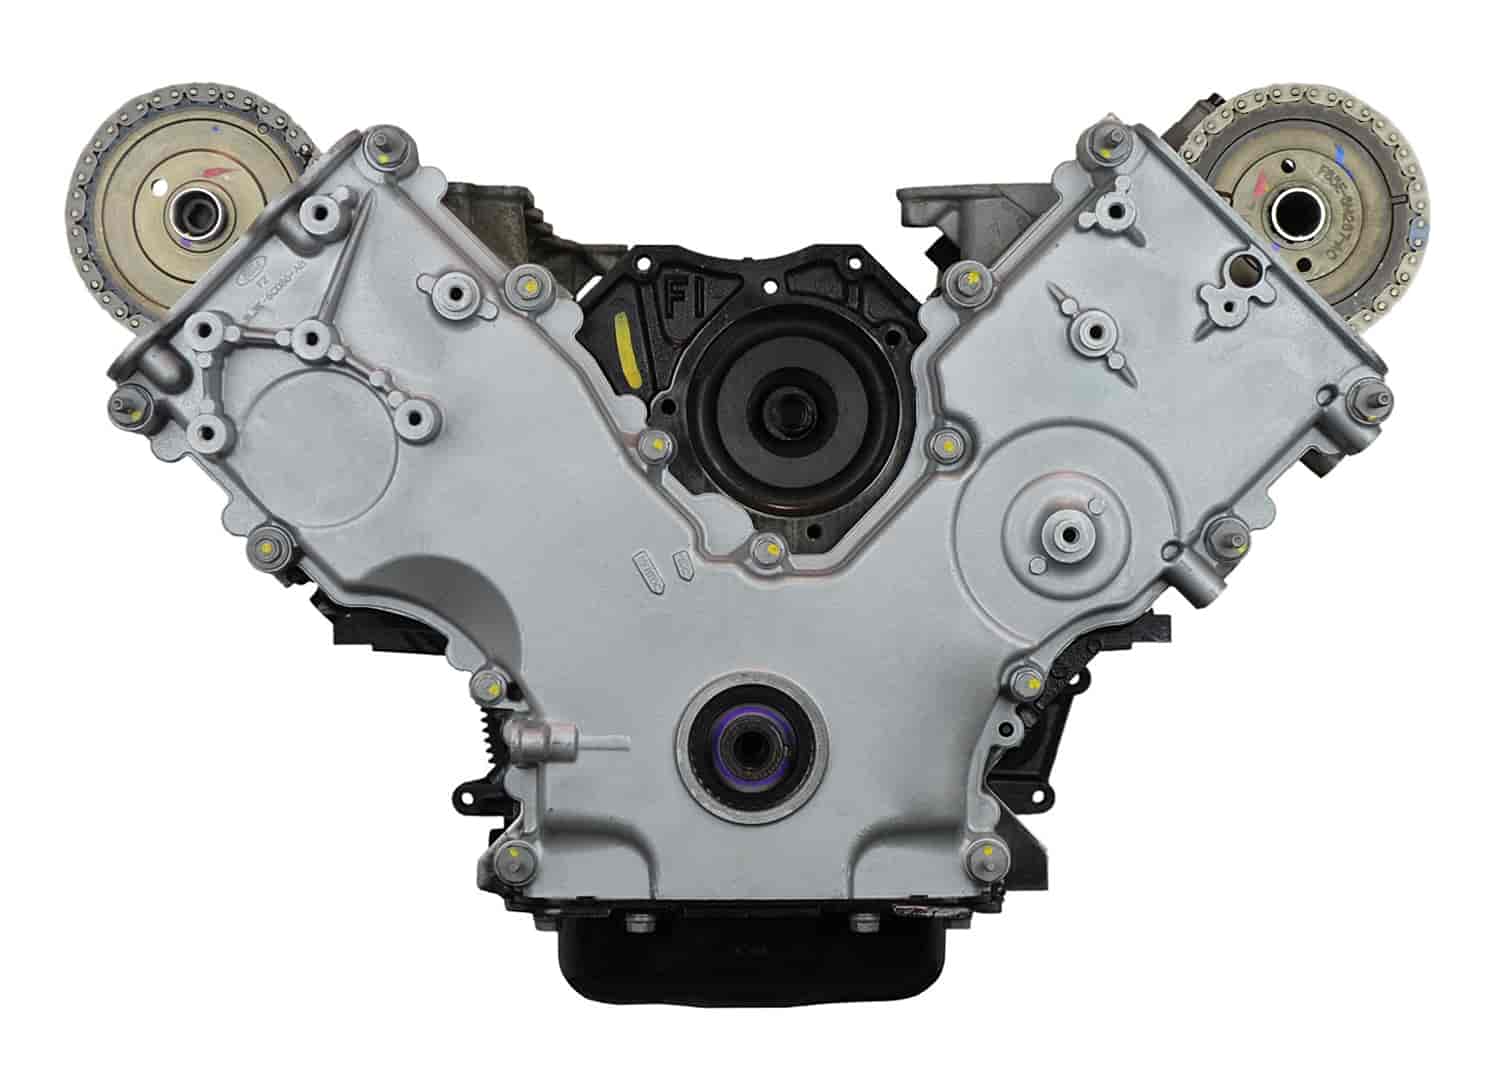 Remanufactured Crate Engine for 2004 Ford F-Series Truck